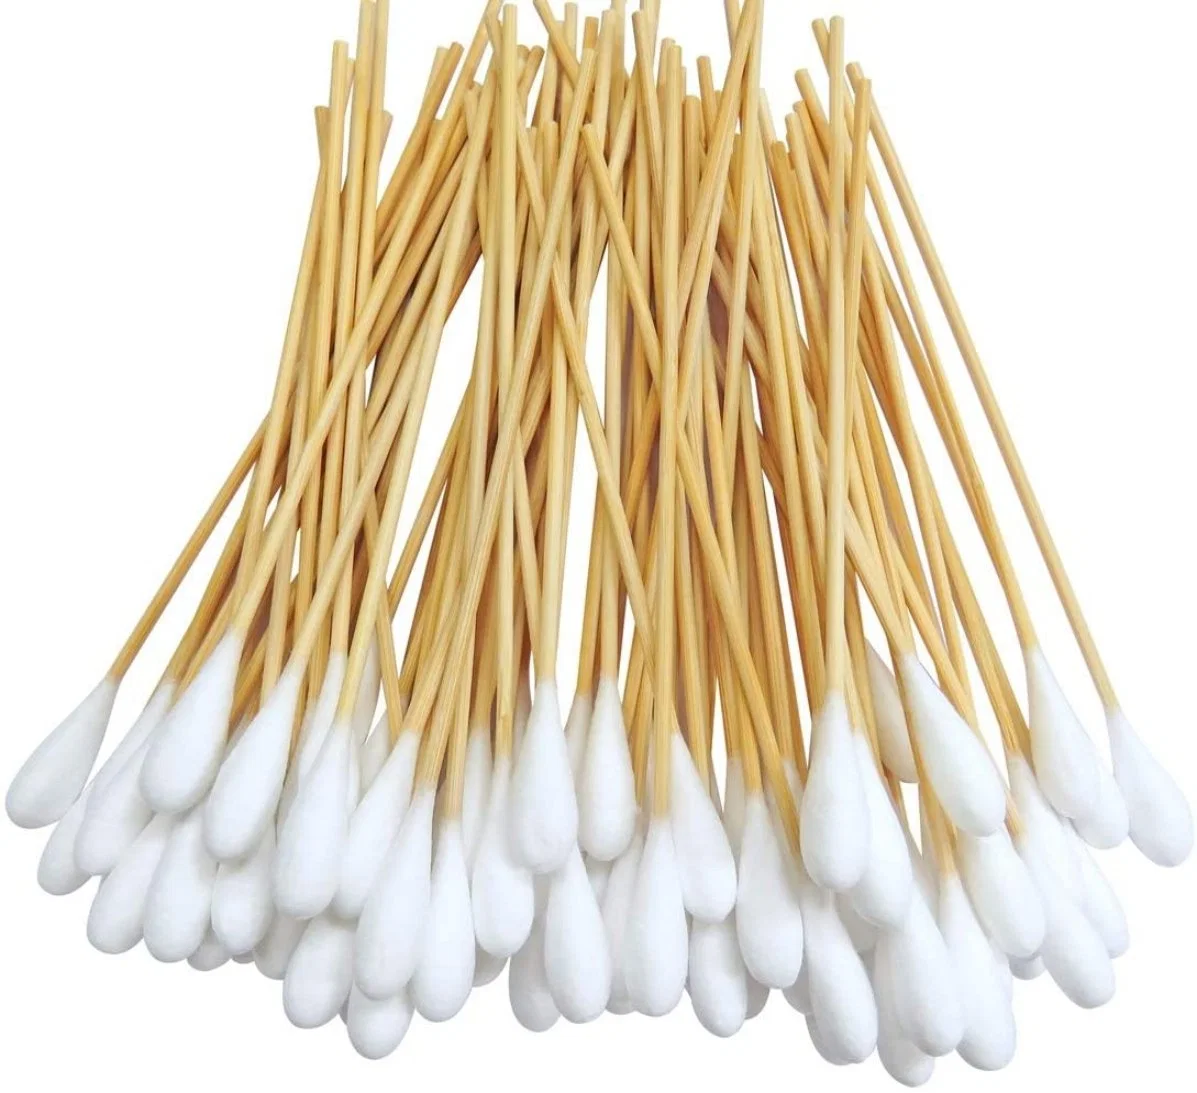 Double Headed Ear Cleaning Bamboo/Wooden Stick Cotton Buds